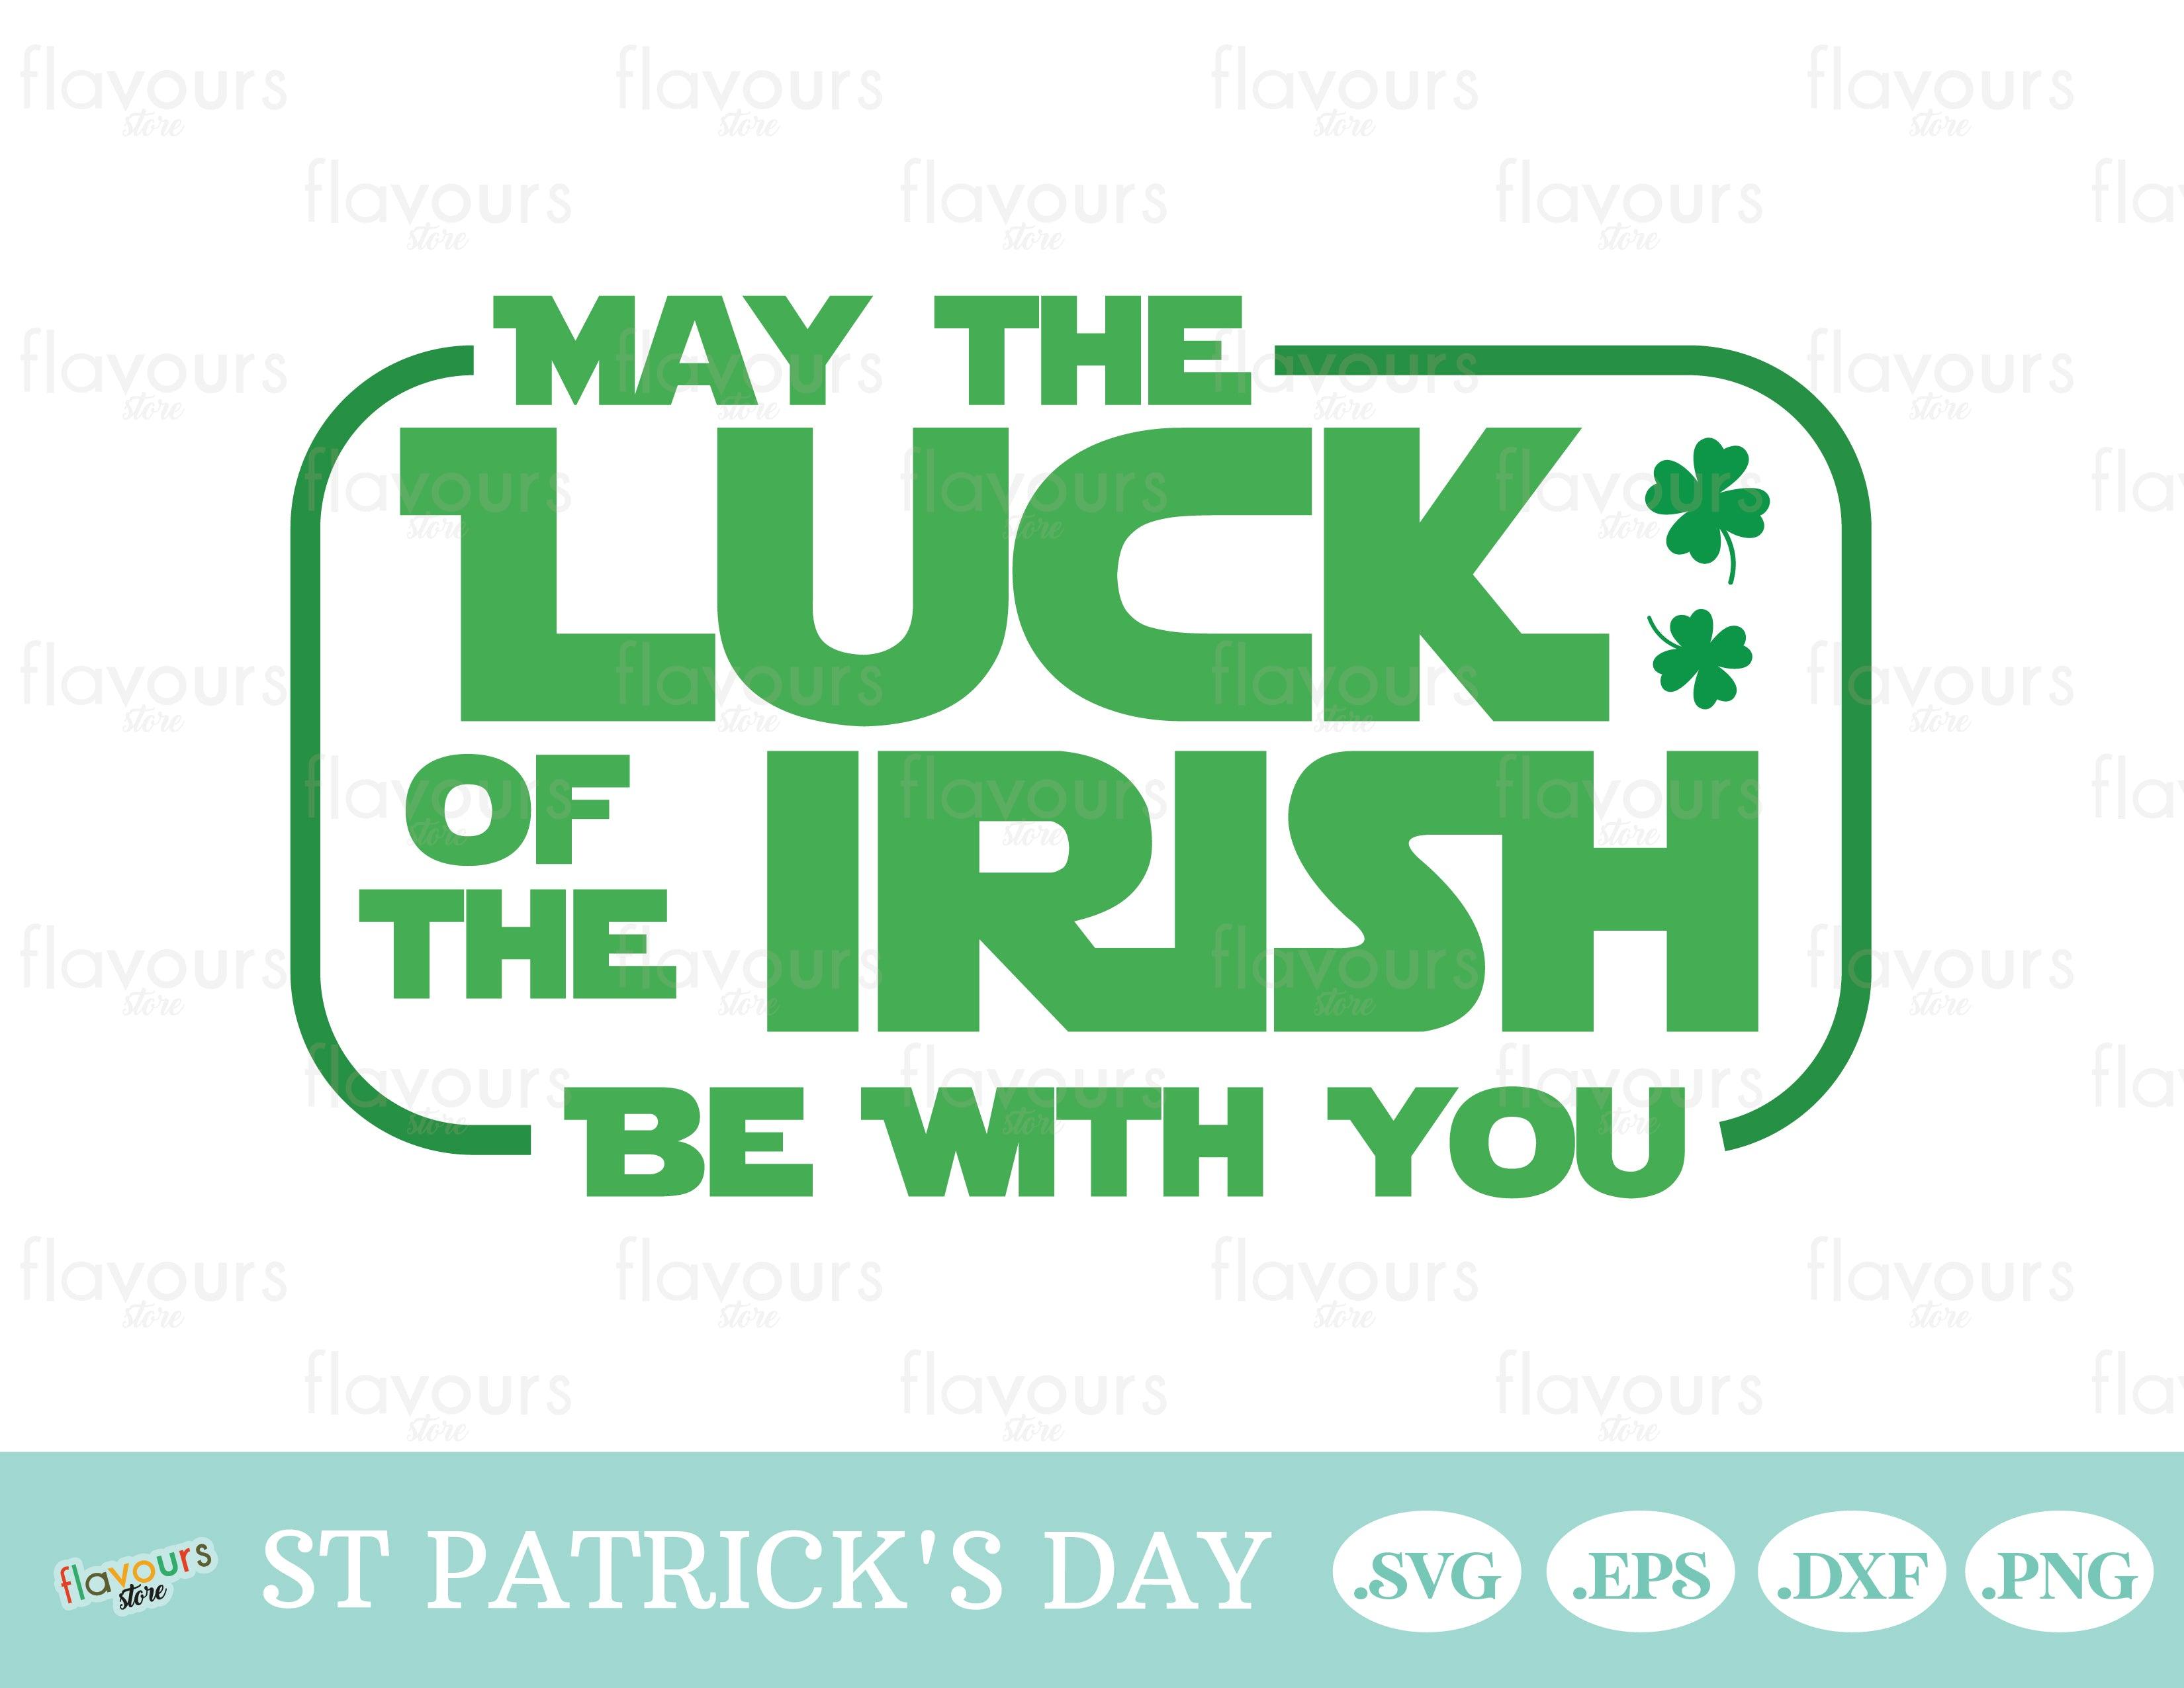 May the luck of the Irish always be with you - hand drawn vector